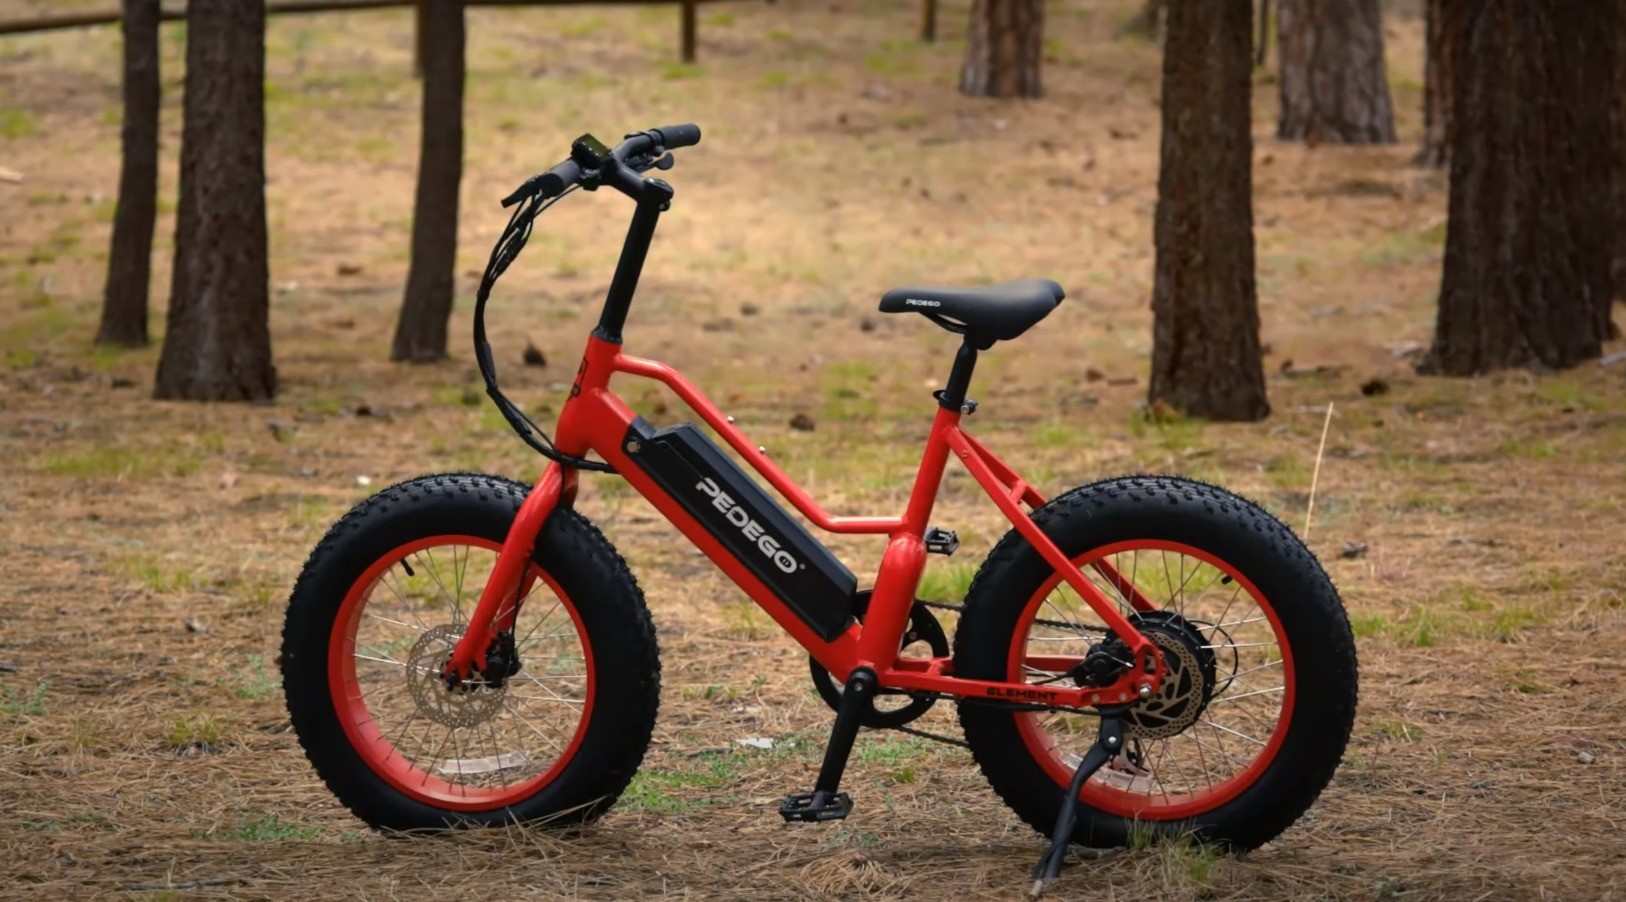 The "Element" from Pedego Is a Powerful, Inexpensive Ebike that Wants